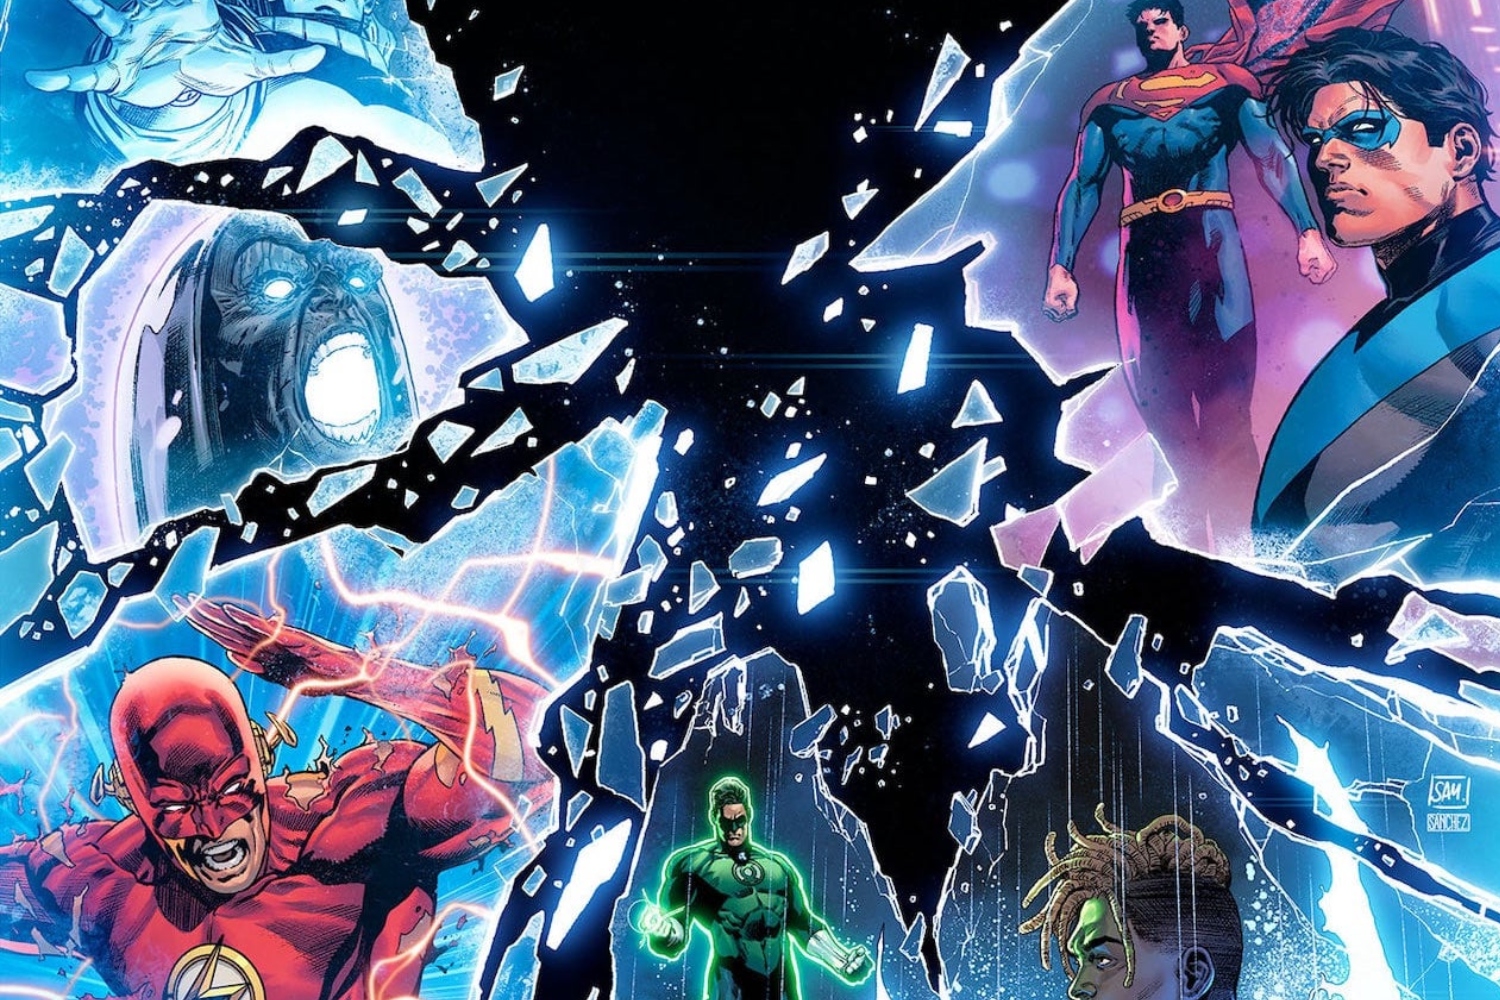 Joshua Williamson goes behind the scenes on 'Justice League: Road to Dark Crisis'